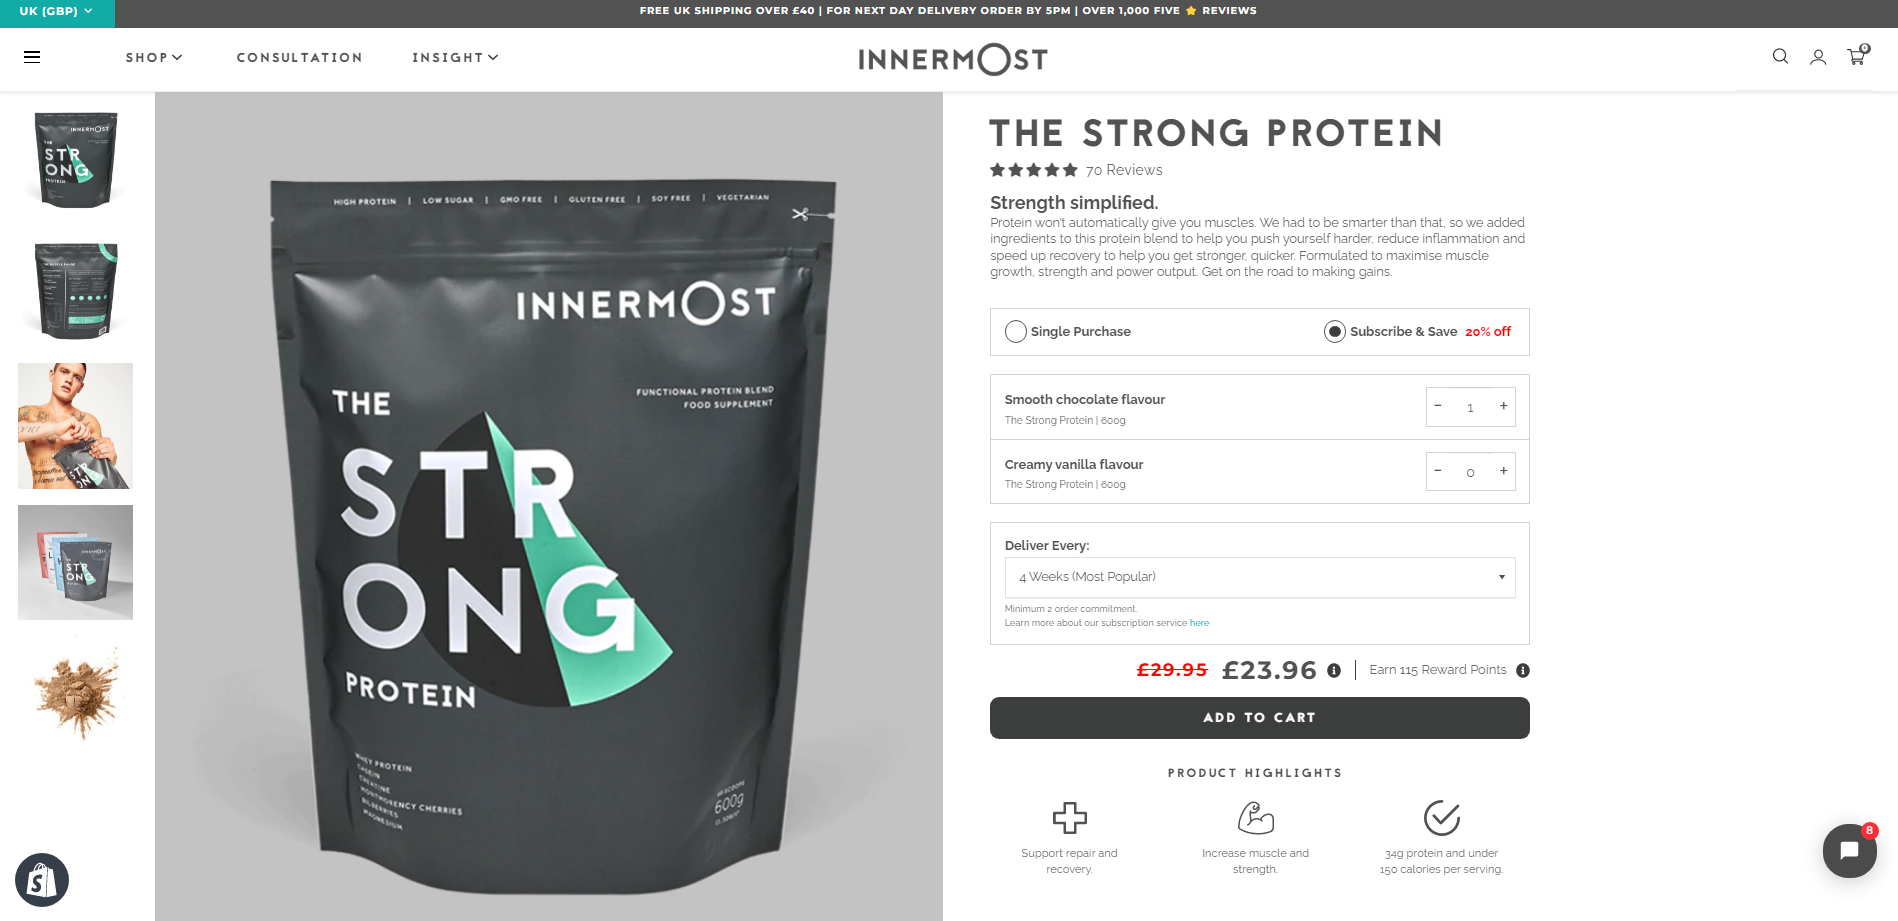 Innermost's Product Display Page and Subscription